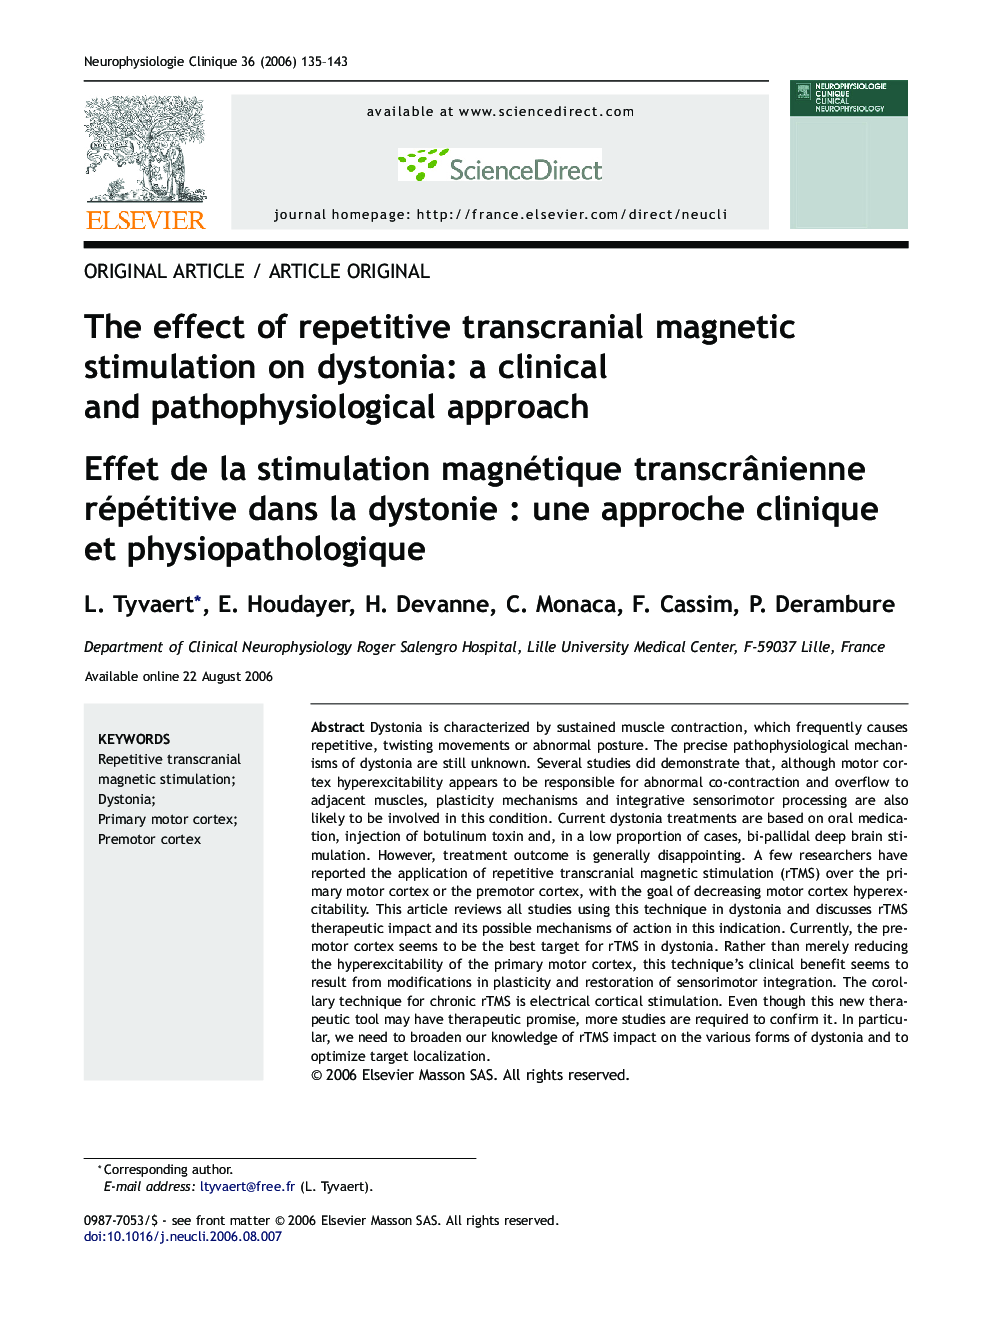 The effect ofÂ repetitive transcranial magnetic stimulation onÂ dystonia: aÂ clinical andÂ pathophysiological approach